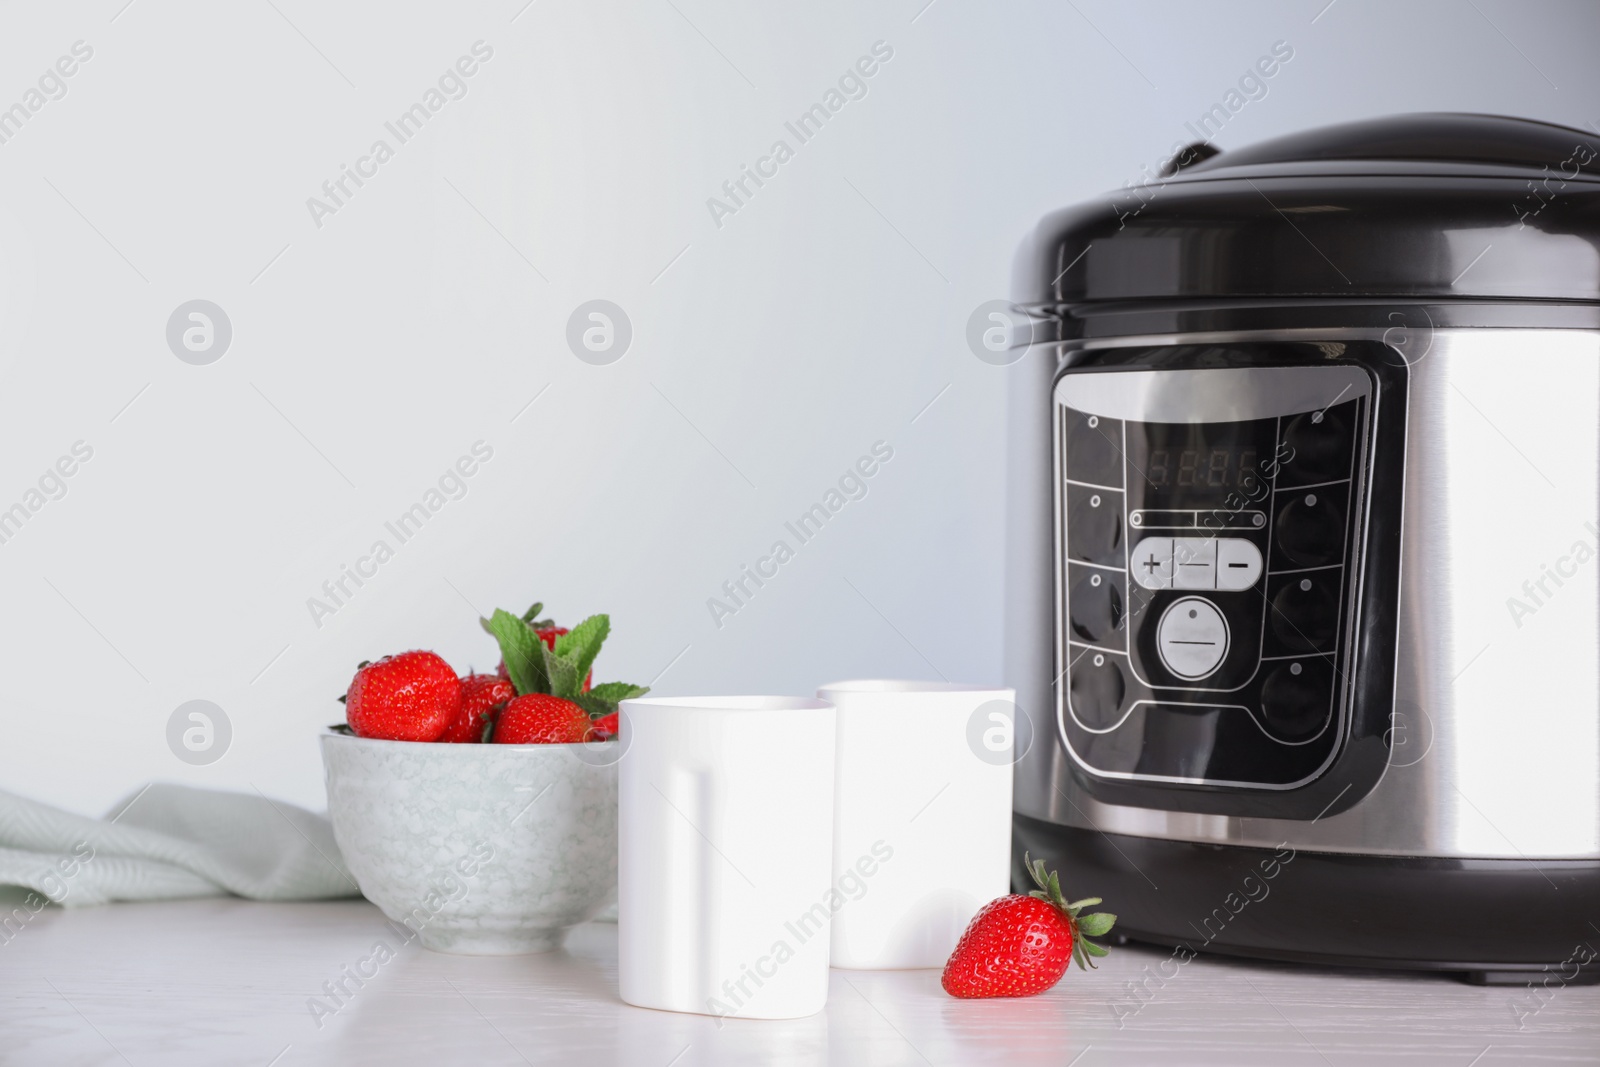 Photo of Cups of homemade yogurt, strawberries and multi cooker on table